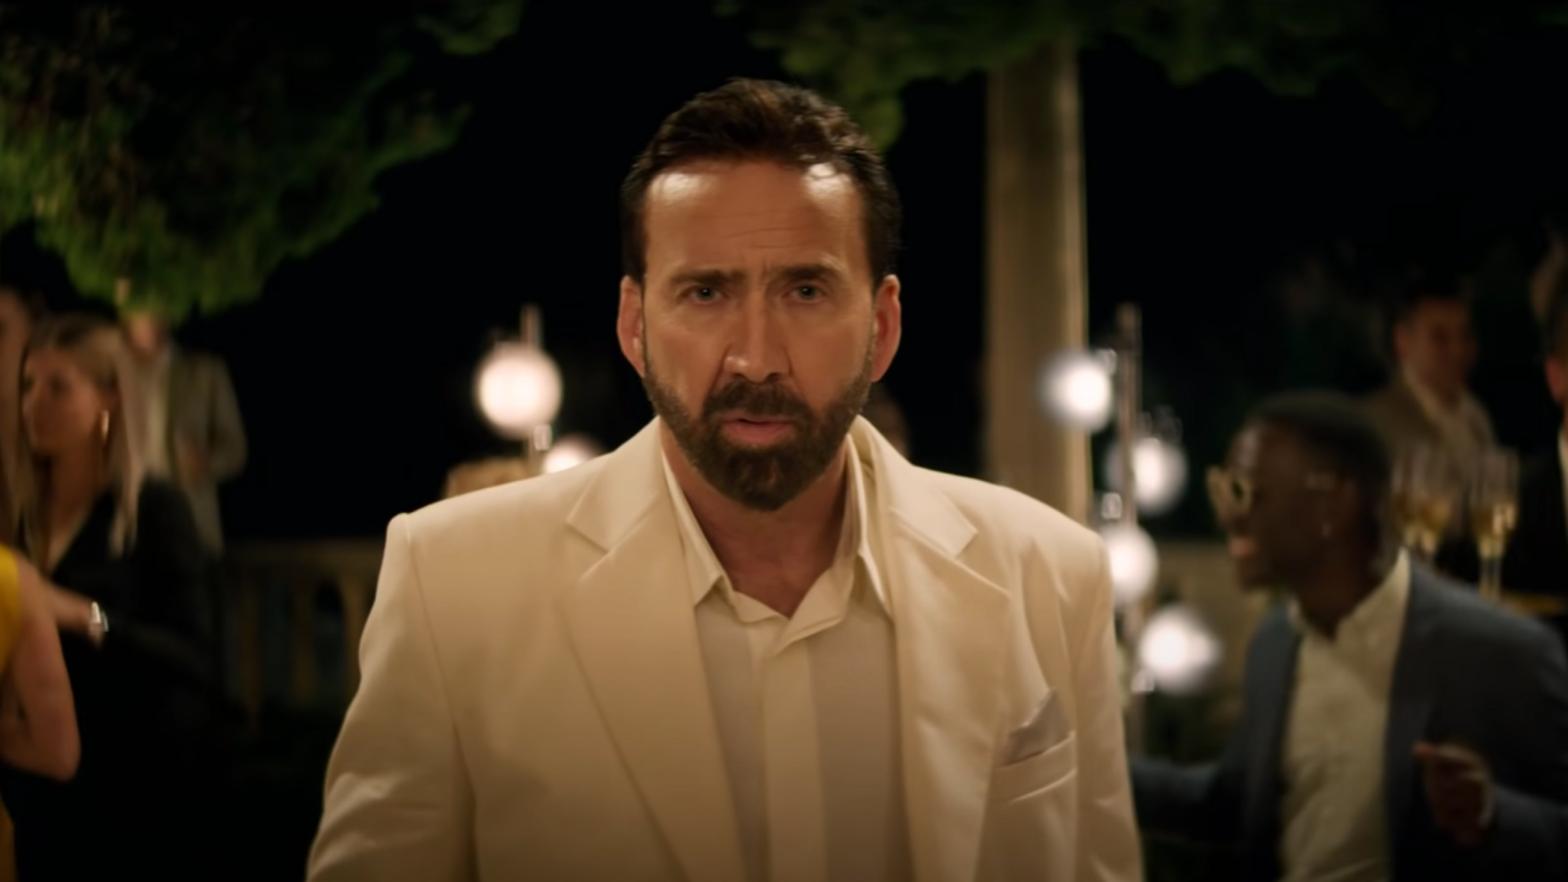 Nic Cage as Nick Cage in The Unbearable Weight of Massive Talent. (Screenshot: Lionsgate)